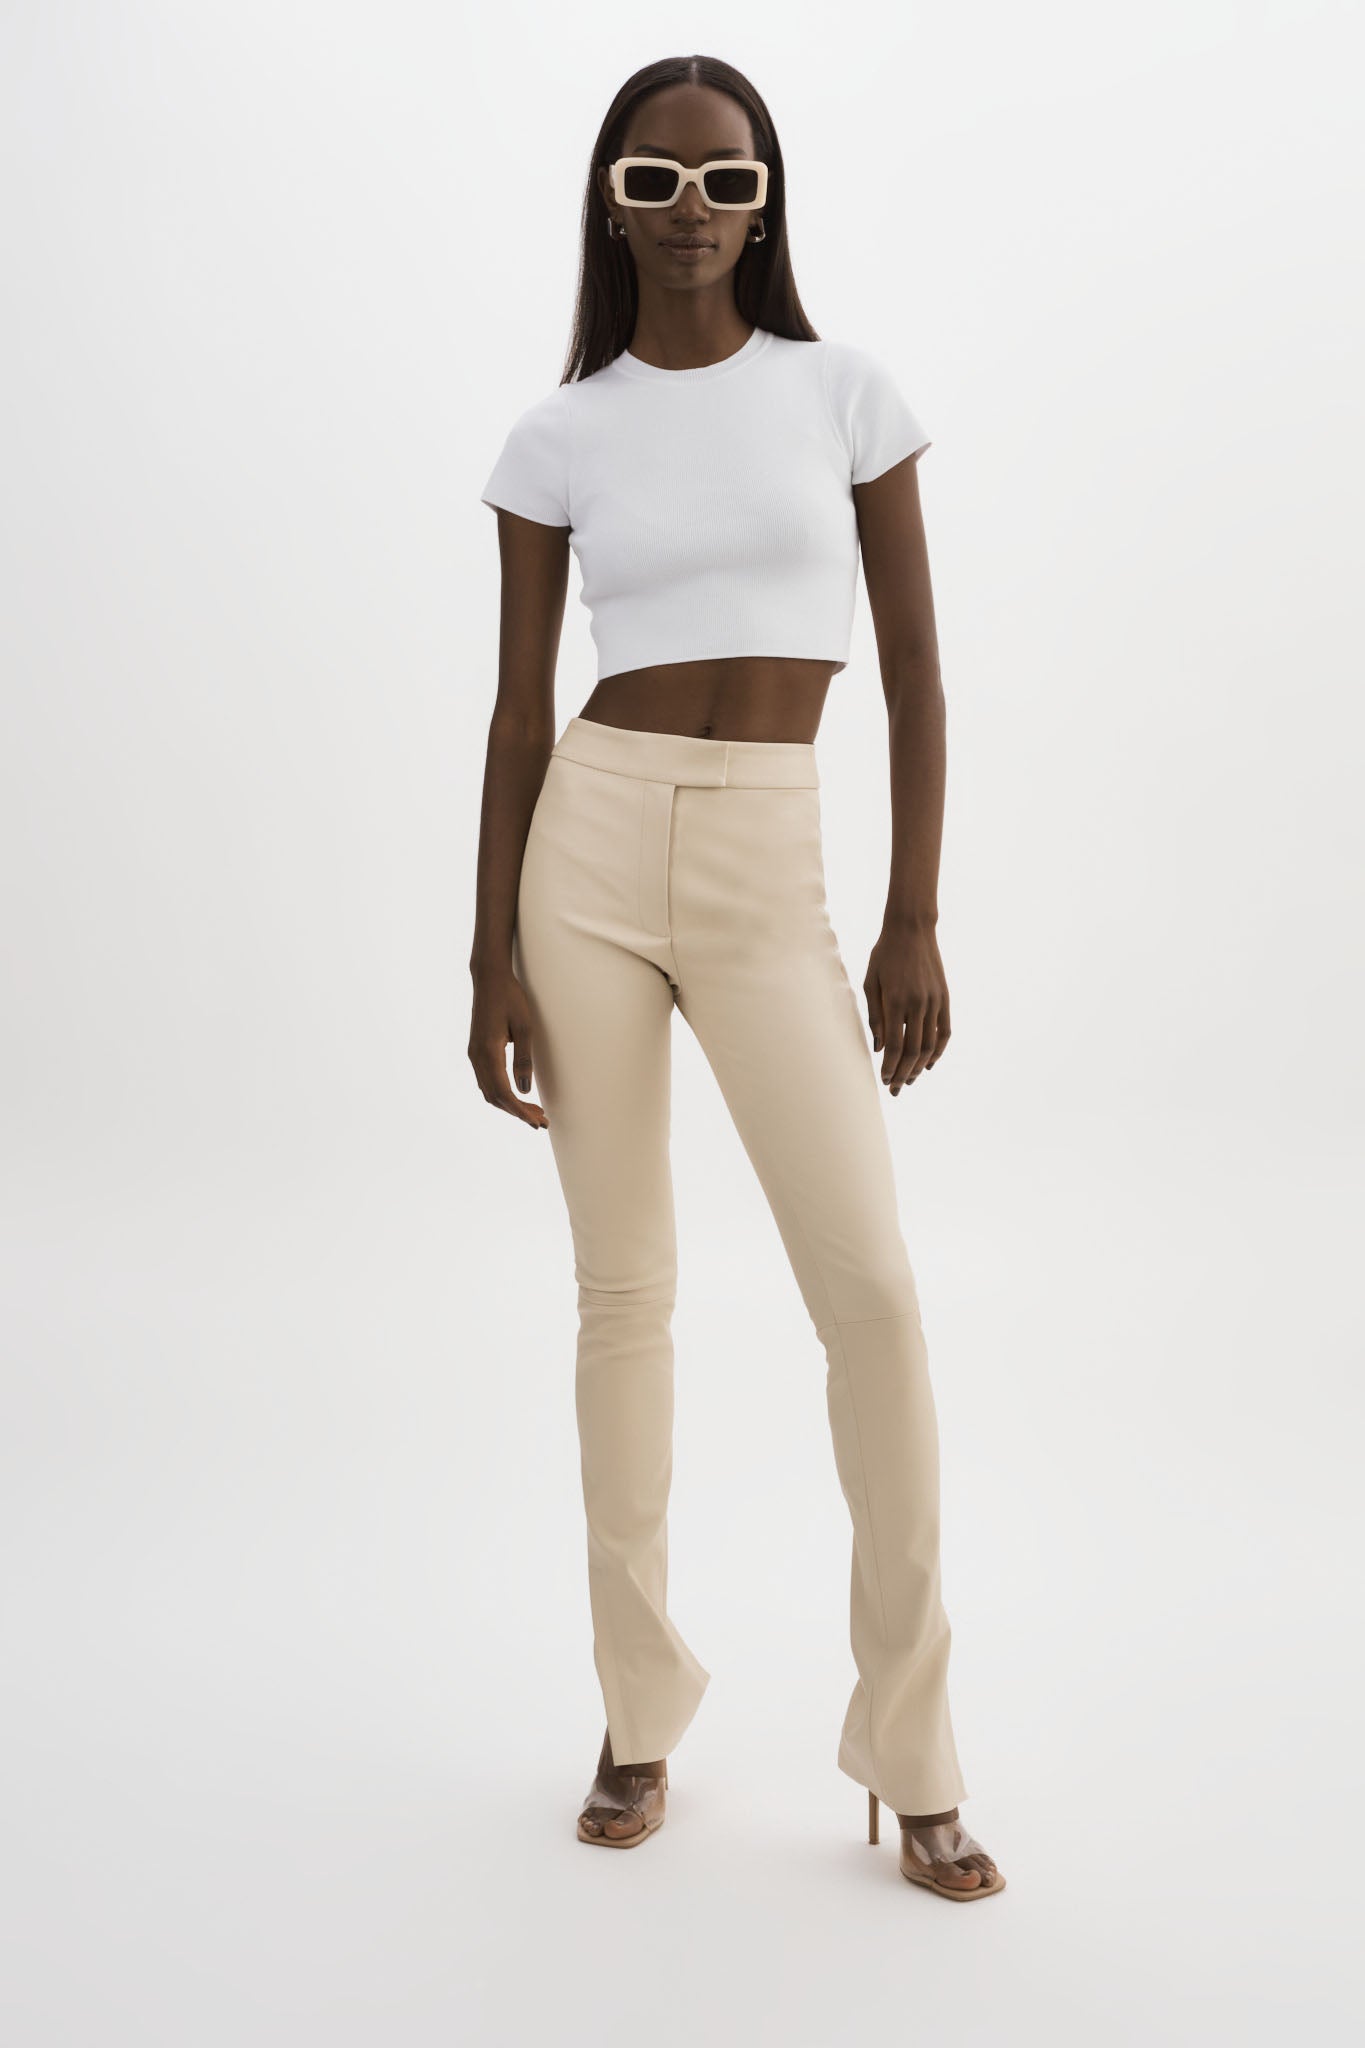 Higher High-Waisted Faux-Leather Cropped Flare Pants for Women